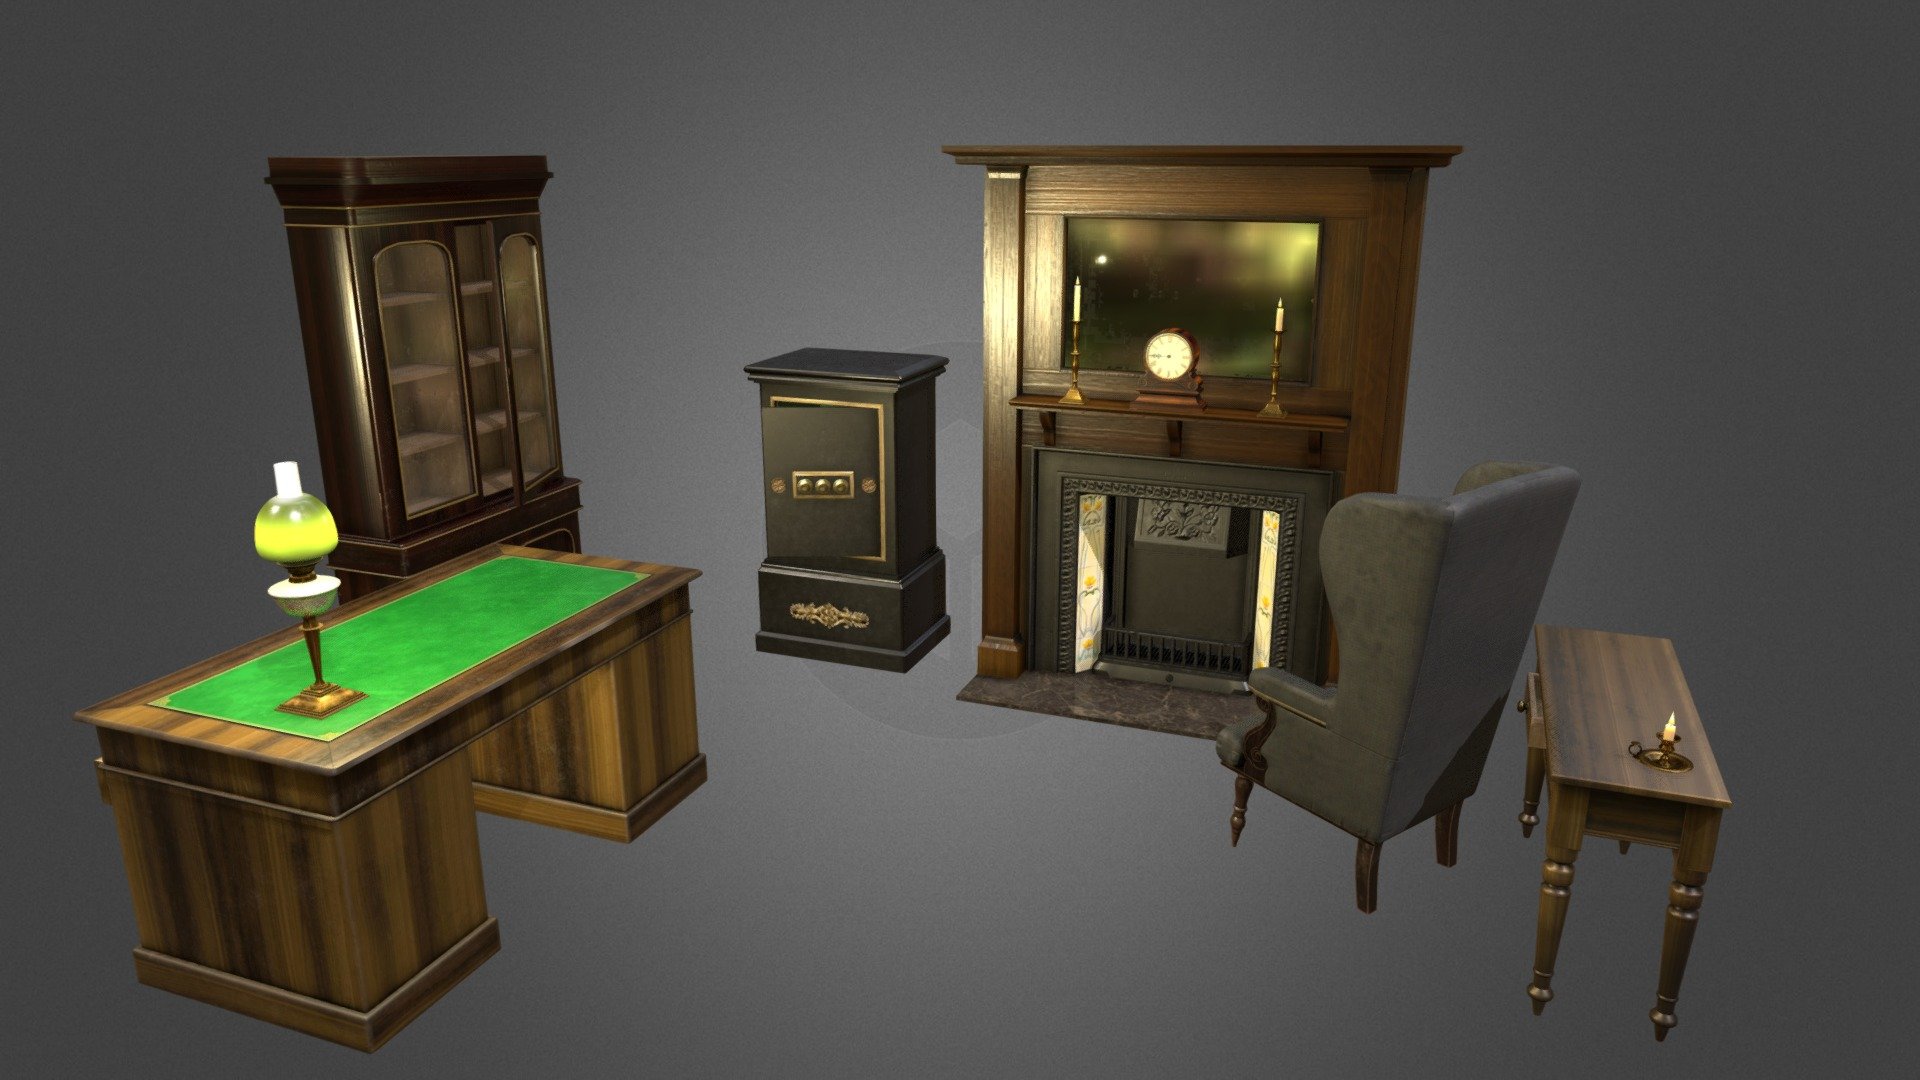 Antique furniture (19th century) 
Game ready with PBR Textures; 
Unity3d optimized; 
2 color options; 
Texture Set: Albedo map, Normal map, MetallicSmooth , Ambient Occlusion , Emission; 
Texture : 2048 , 1024; 
Optimized for games; 
Tested in Unity 3d; 
Polygons: 
safe 1,770; 
fireplace 926; 
lighting 4,025; 
desk 3,278; 
armchair 3,278; 
clock 1,492; 
Door, combination lock, drawer prepared for animation; - Antique furniture - 3D model by cranberrymk 3d model